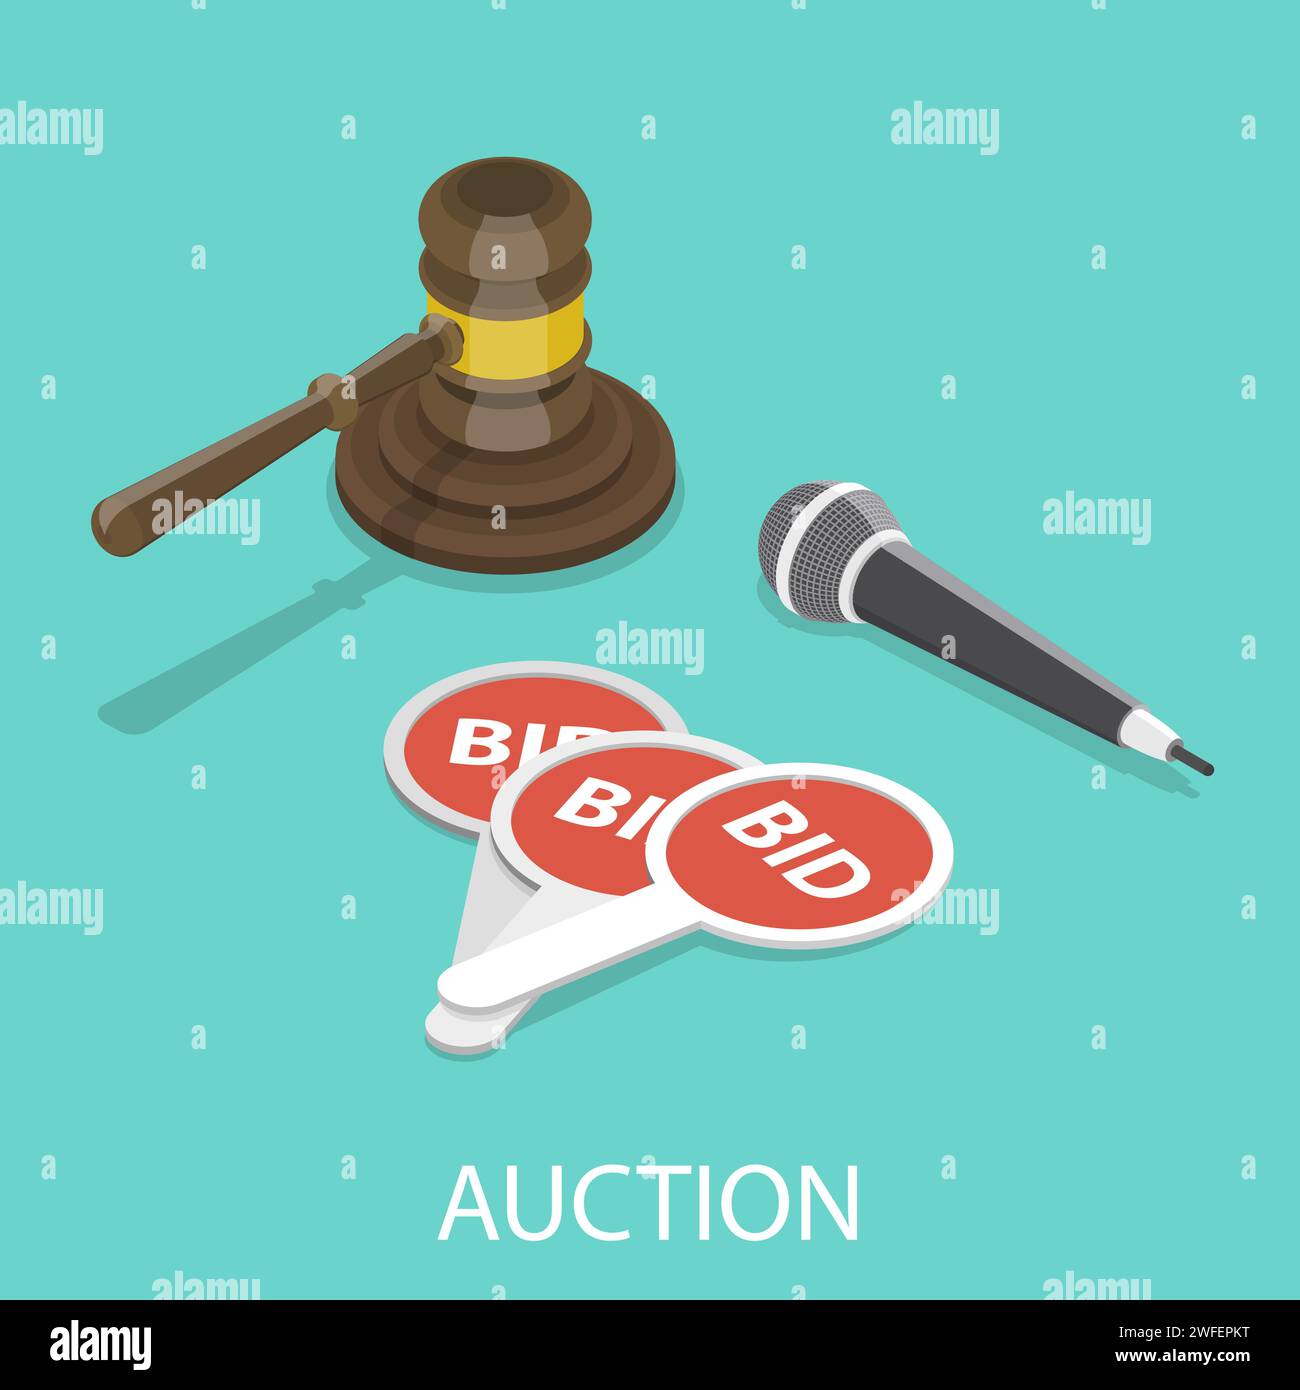 Auction flat isometric vector concept. Hammer, microphone and bidding paddles. Stock Vector